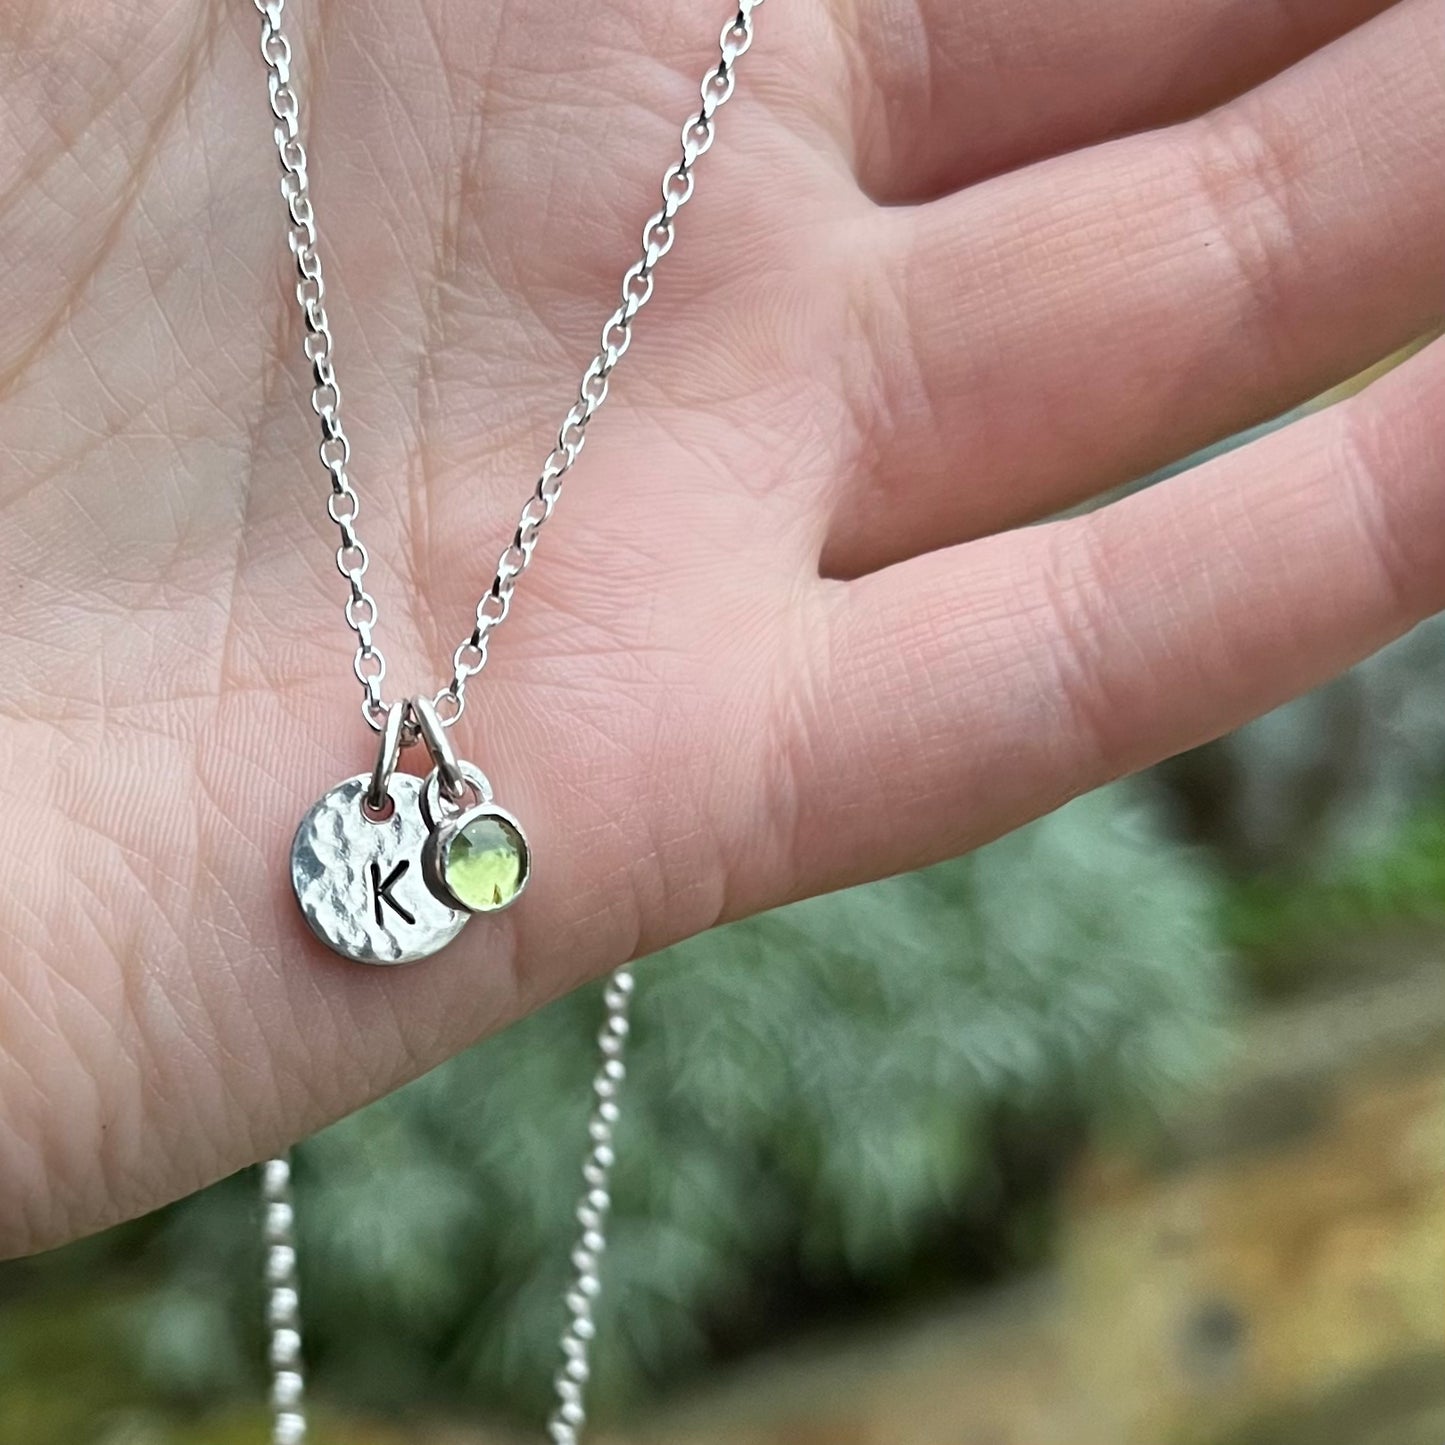 A peridot and sterling silver charm necklace.